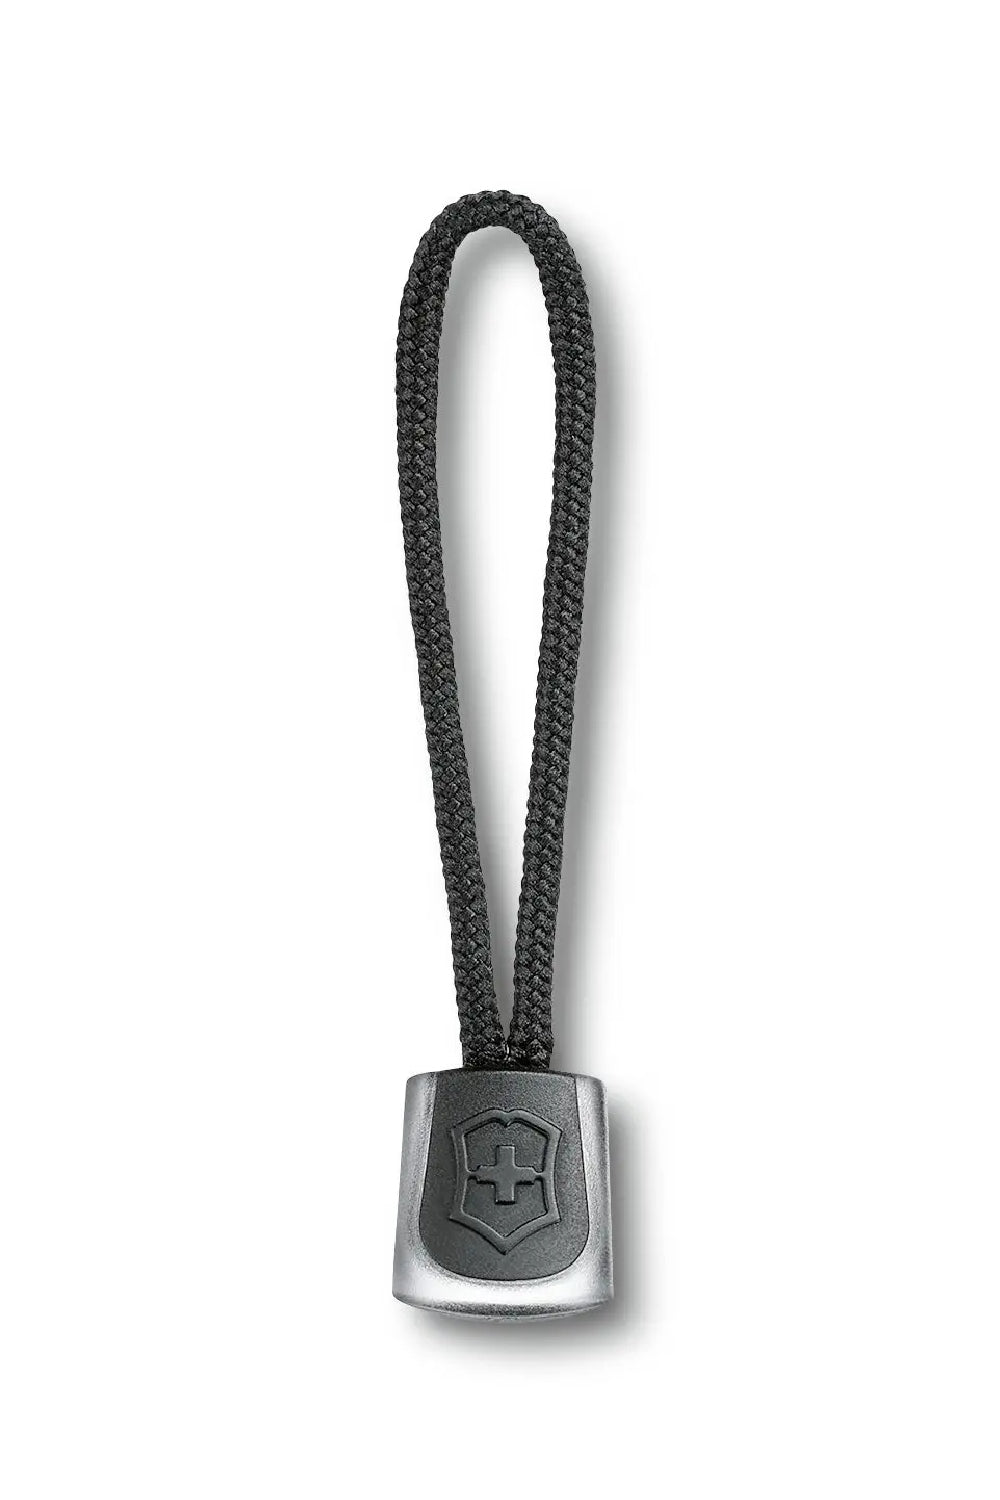 Victorinox Swiss Army Lanyard Nylon Cord with Rubber Grip in Black